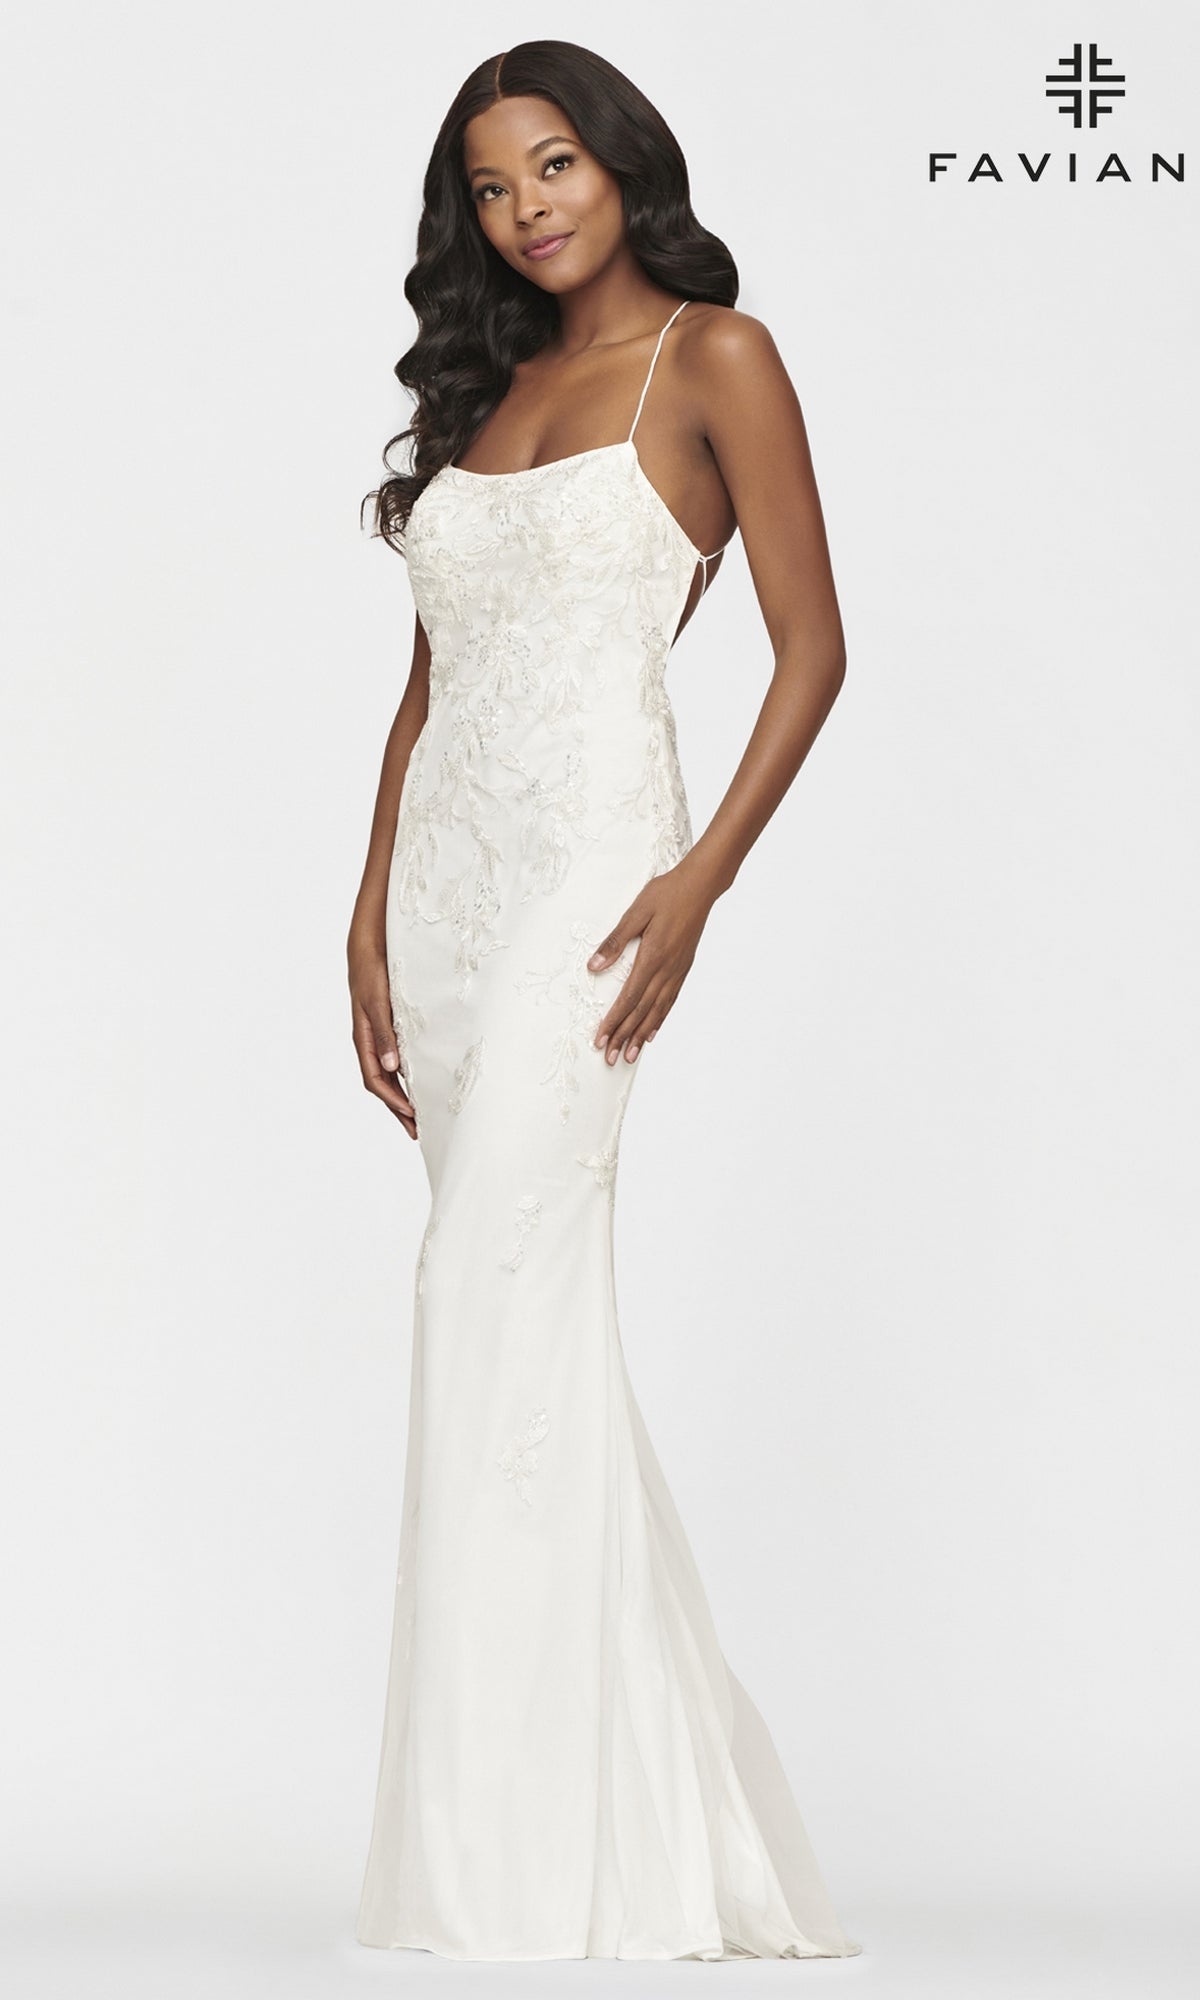 Square Neck Panel Back Wedding Gown | Over The Moon